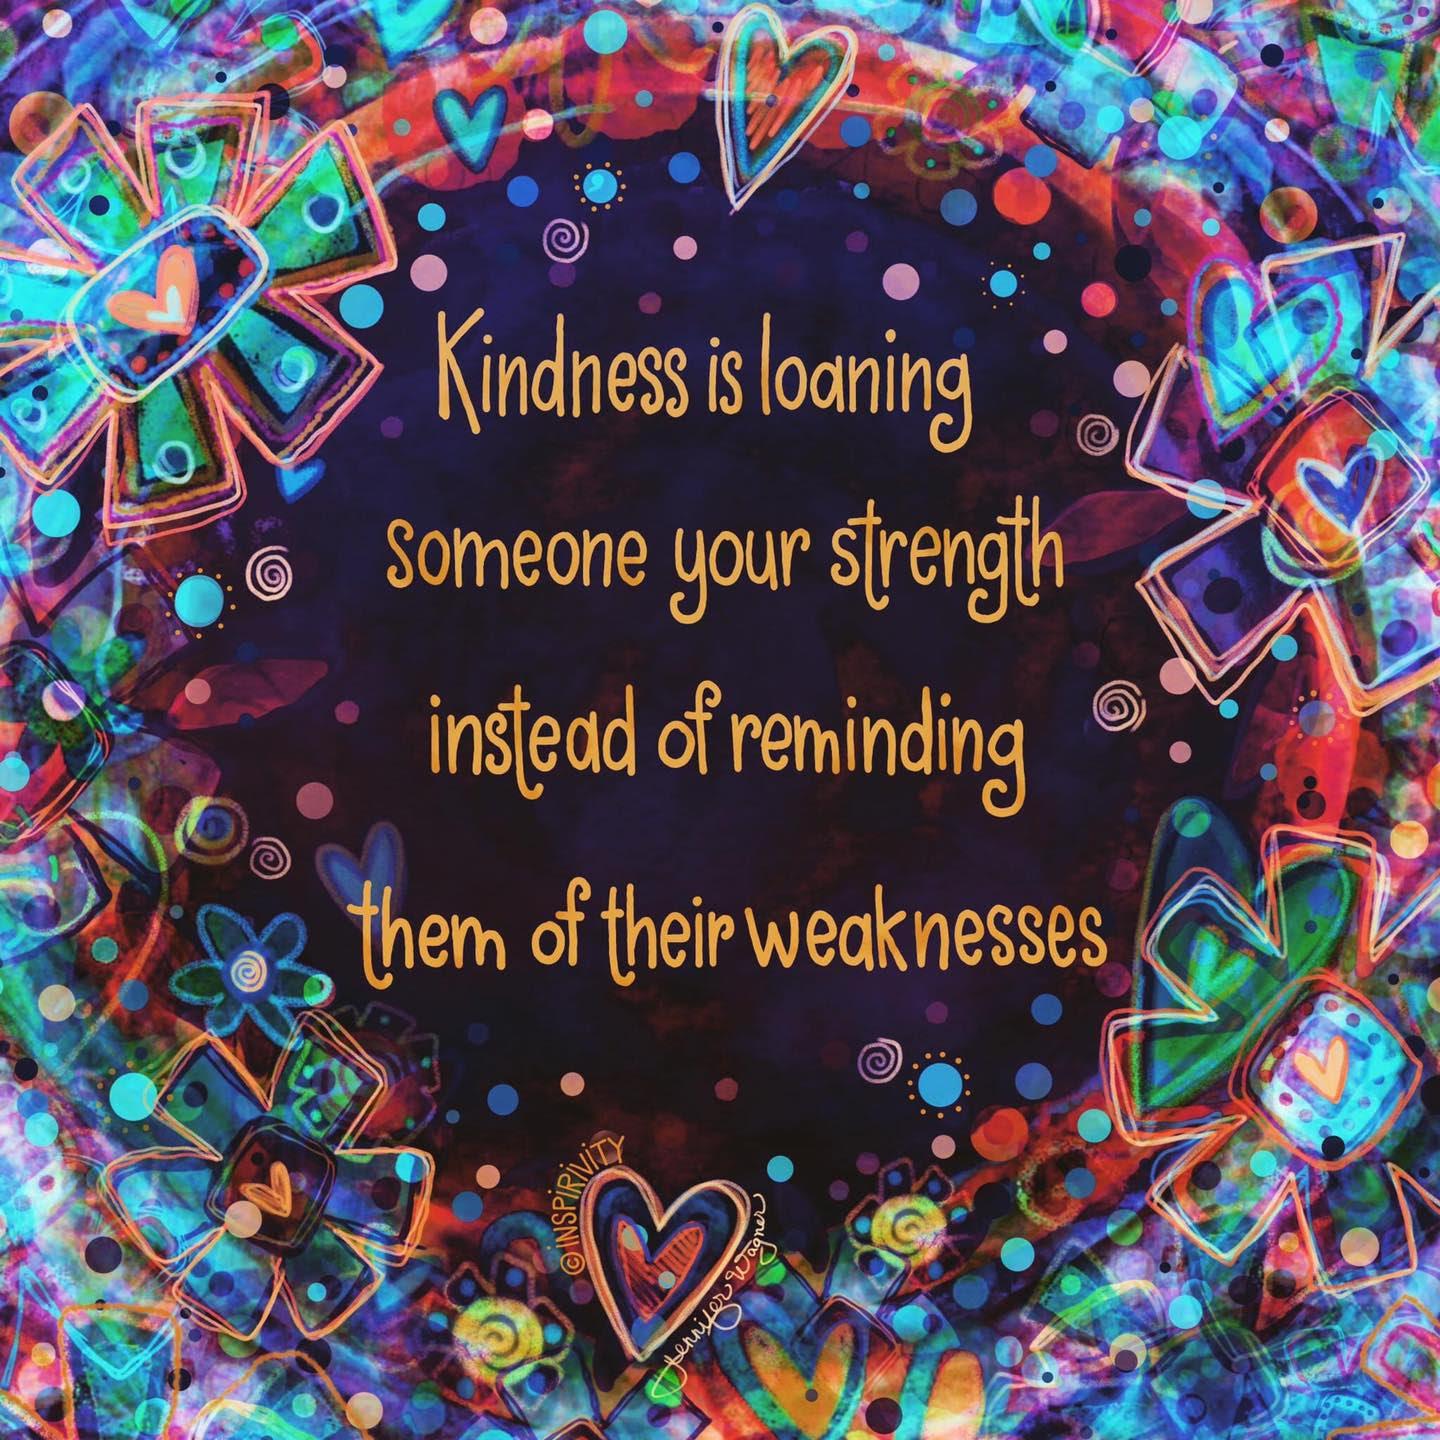 kindness is loaning someone your strength instead of reminding them of their weaknesses